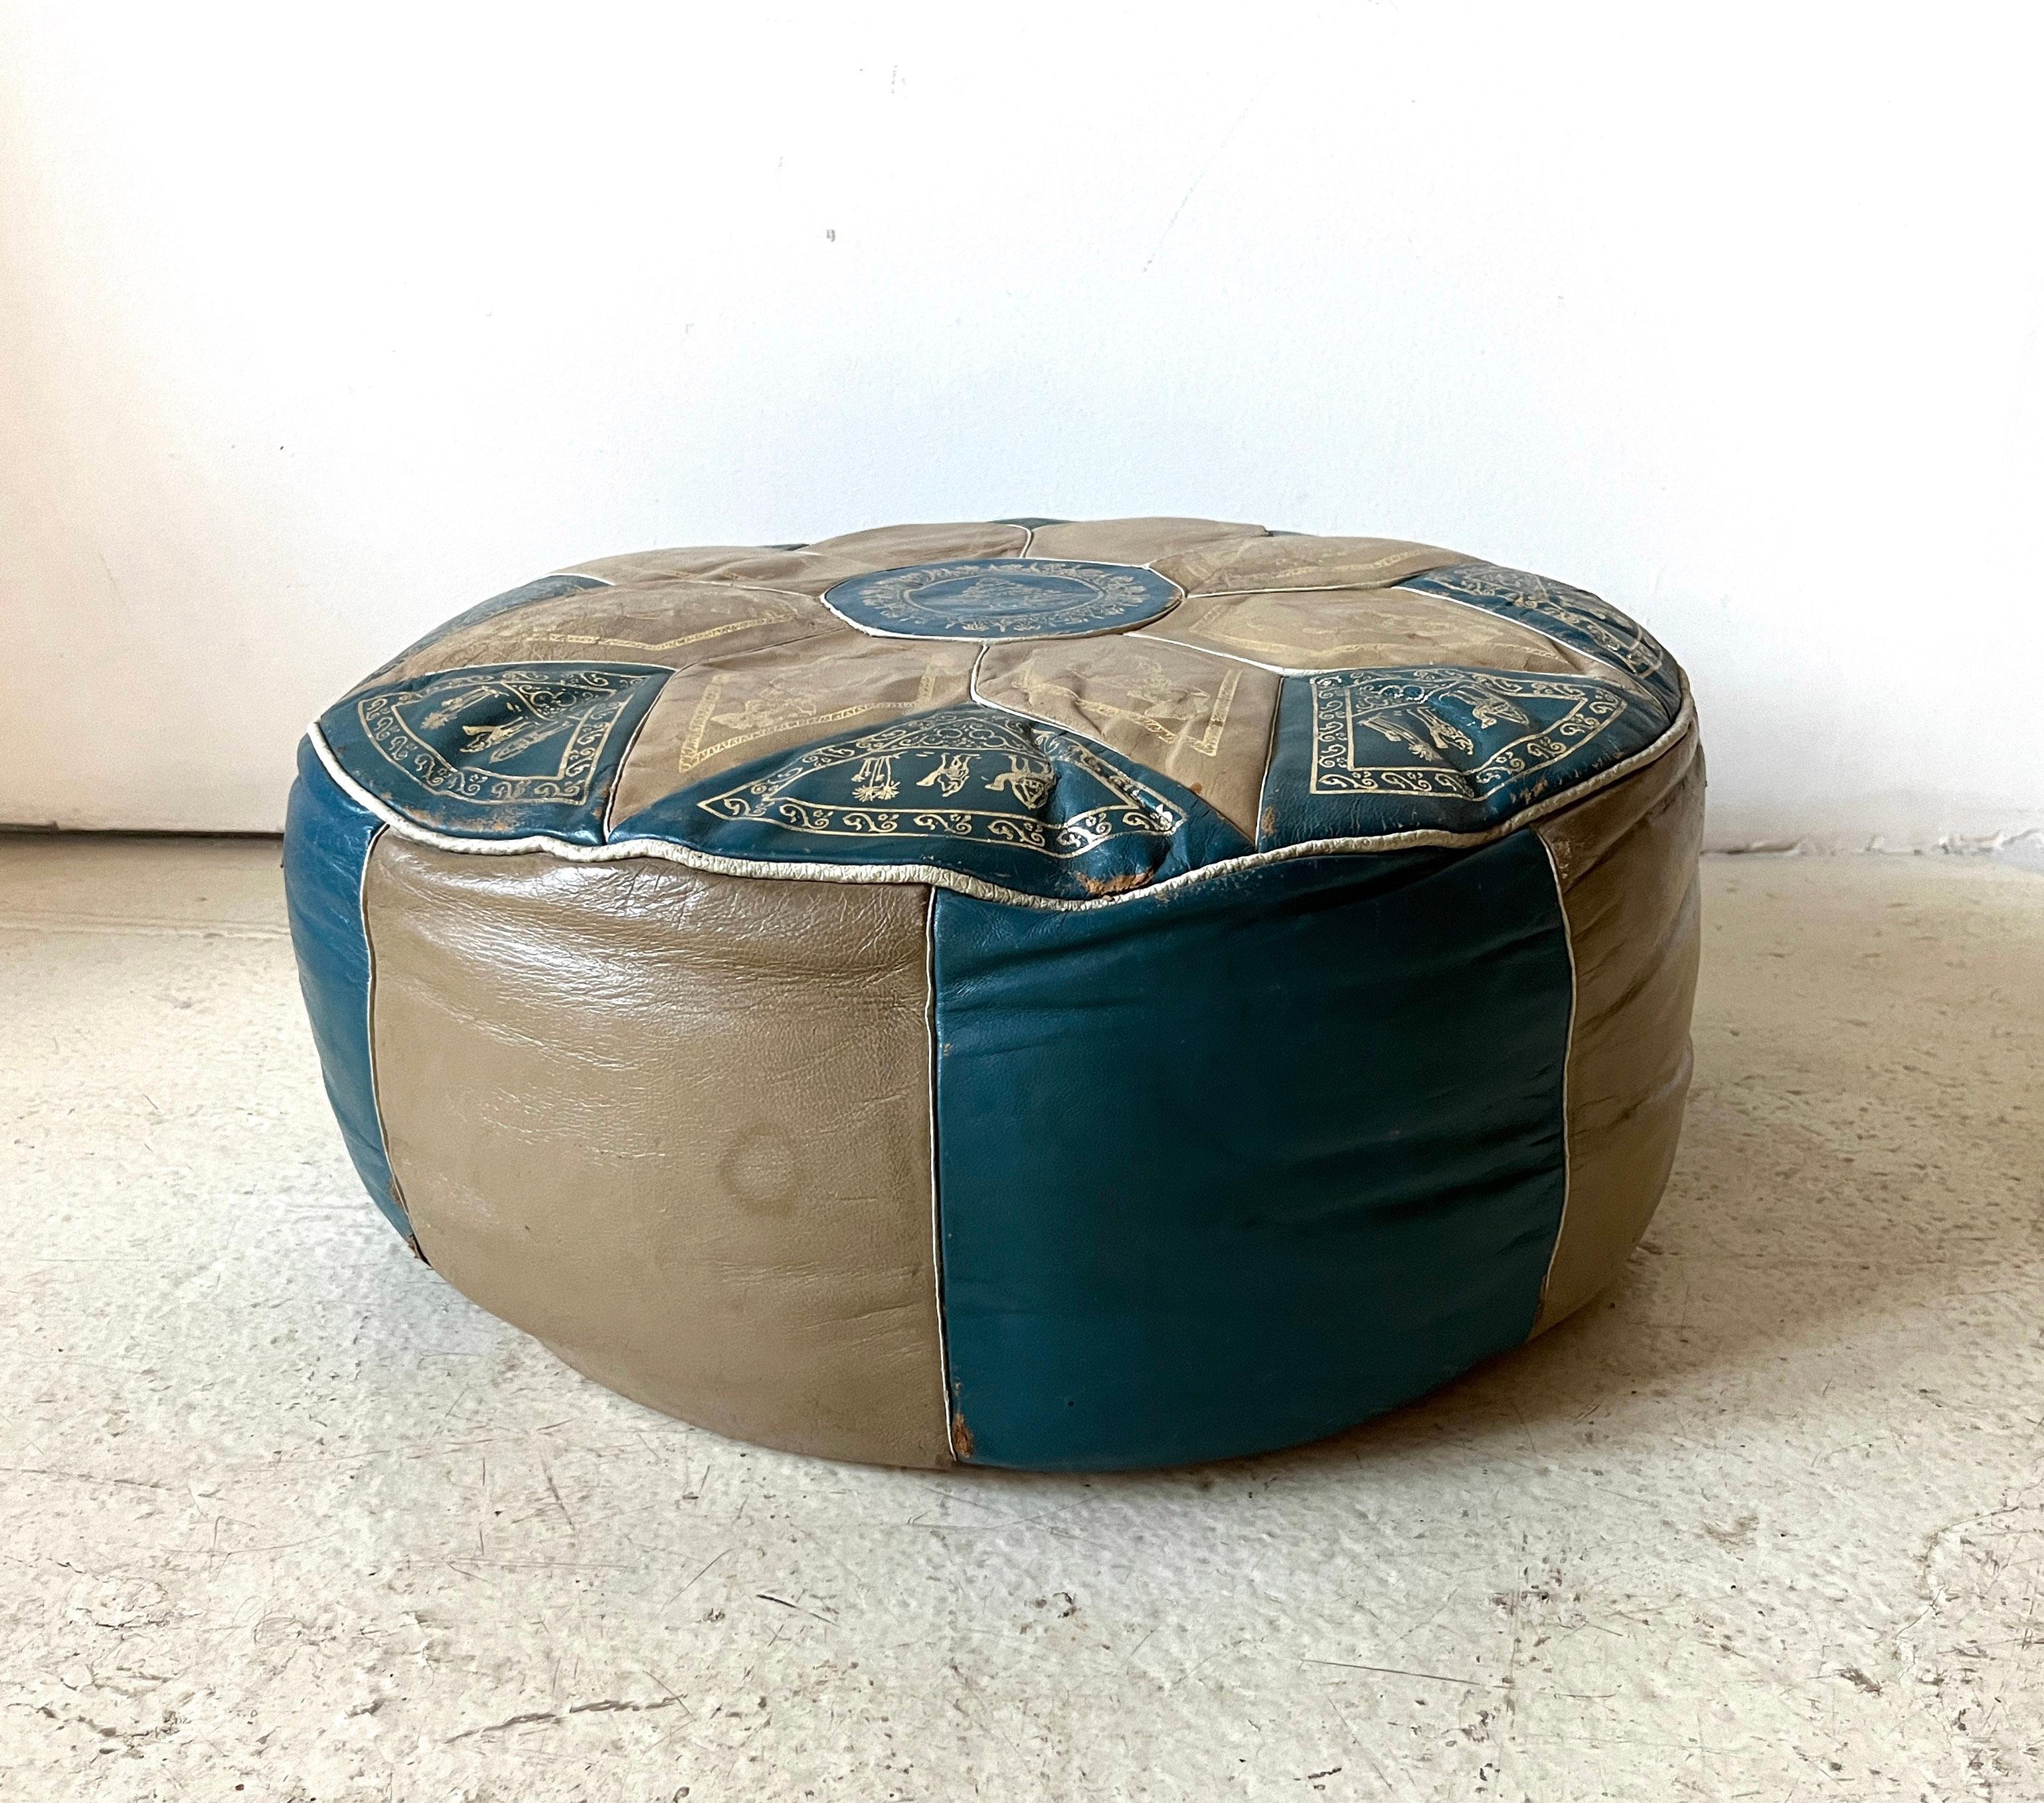 Vintage Bohemian Moroccan Round Leather Pouf, Blue and Tan Ottoman, Foot Rest In Fair Condition For Sale In Chicago, IL